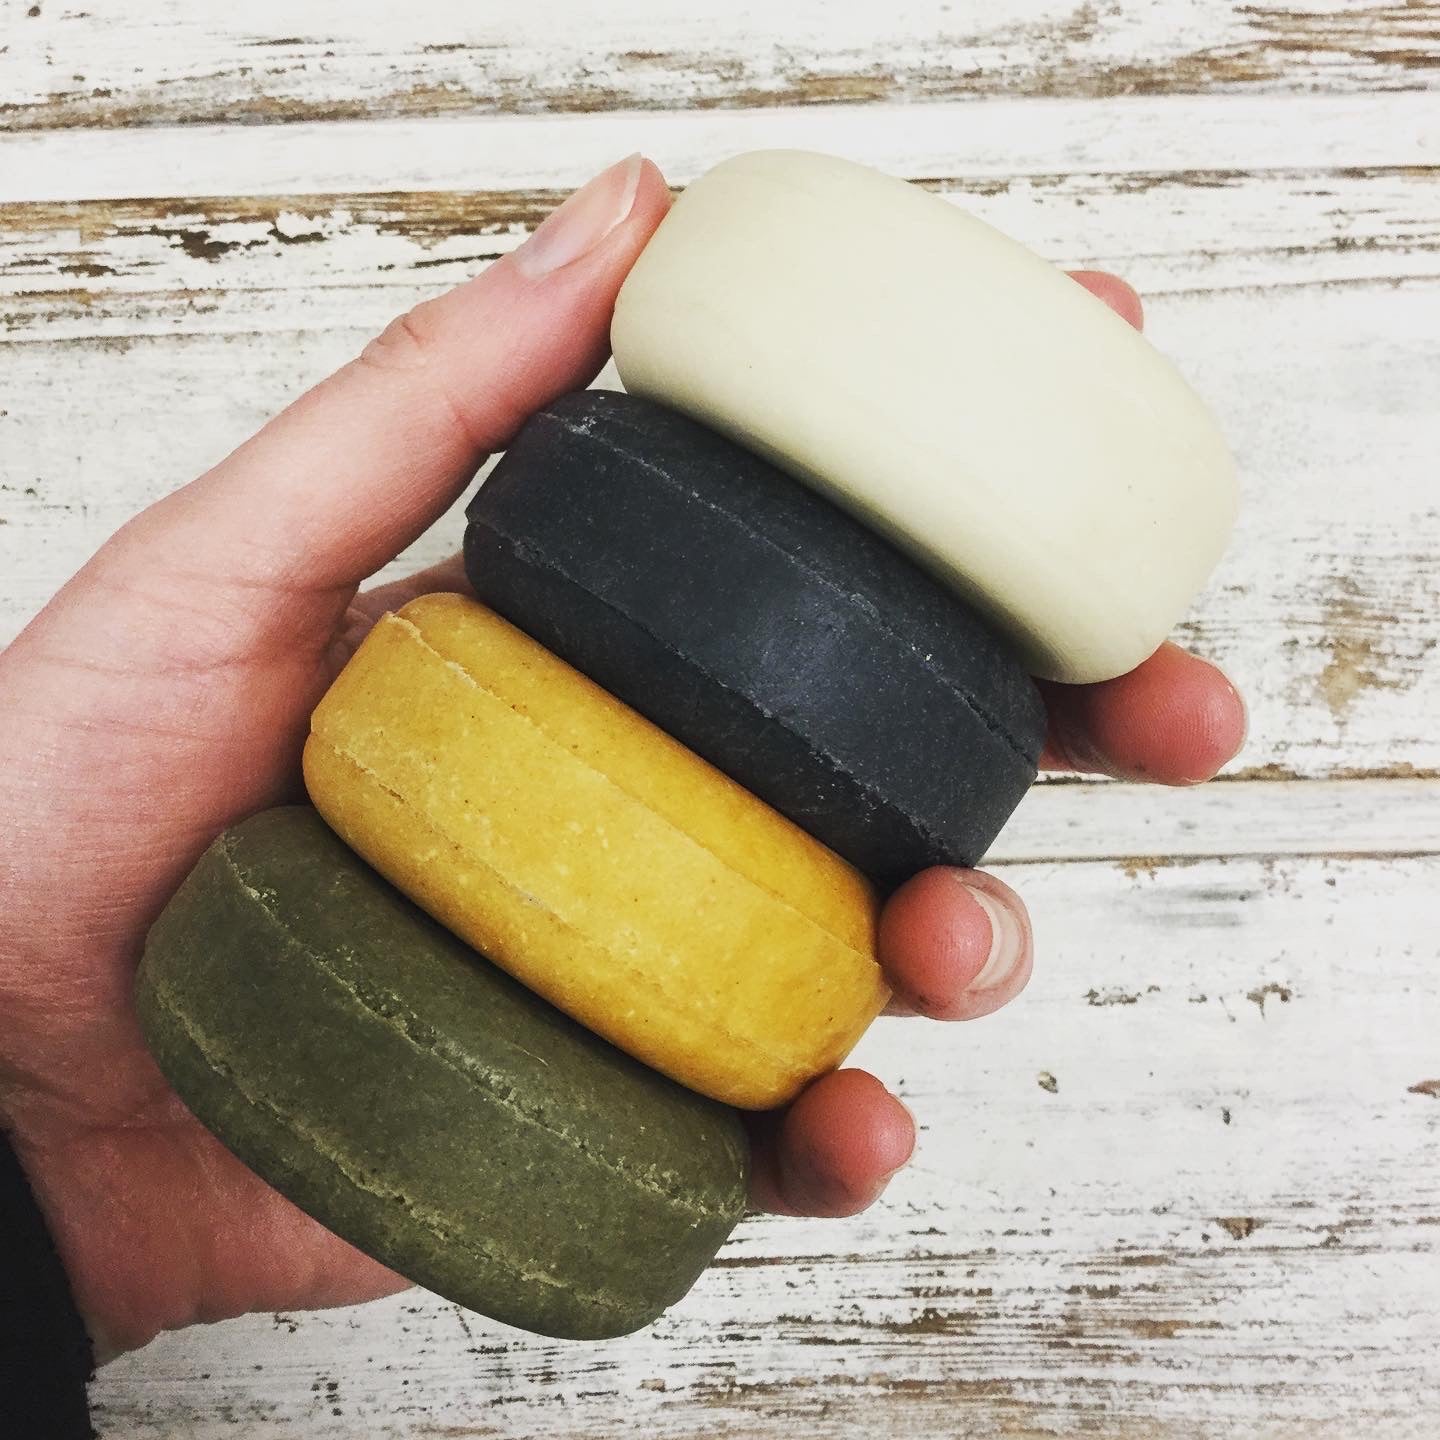 4 natural coloured shampoo bars in hand with whitewashed wooden background